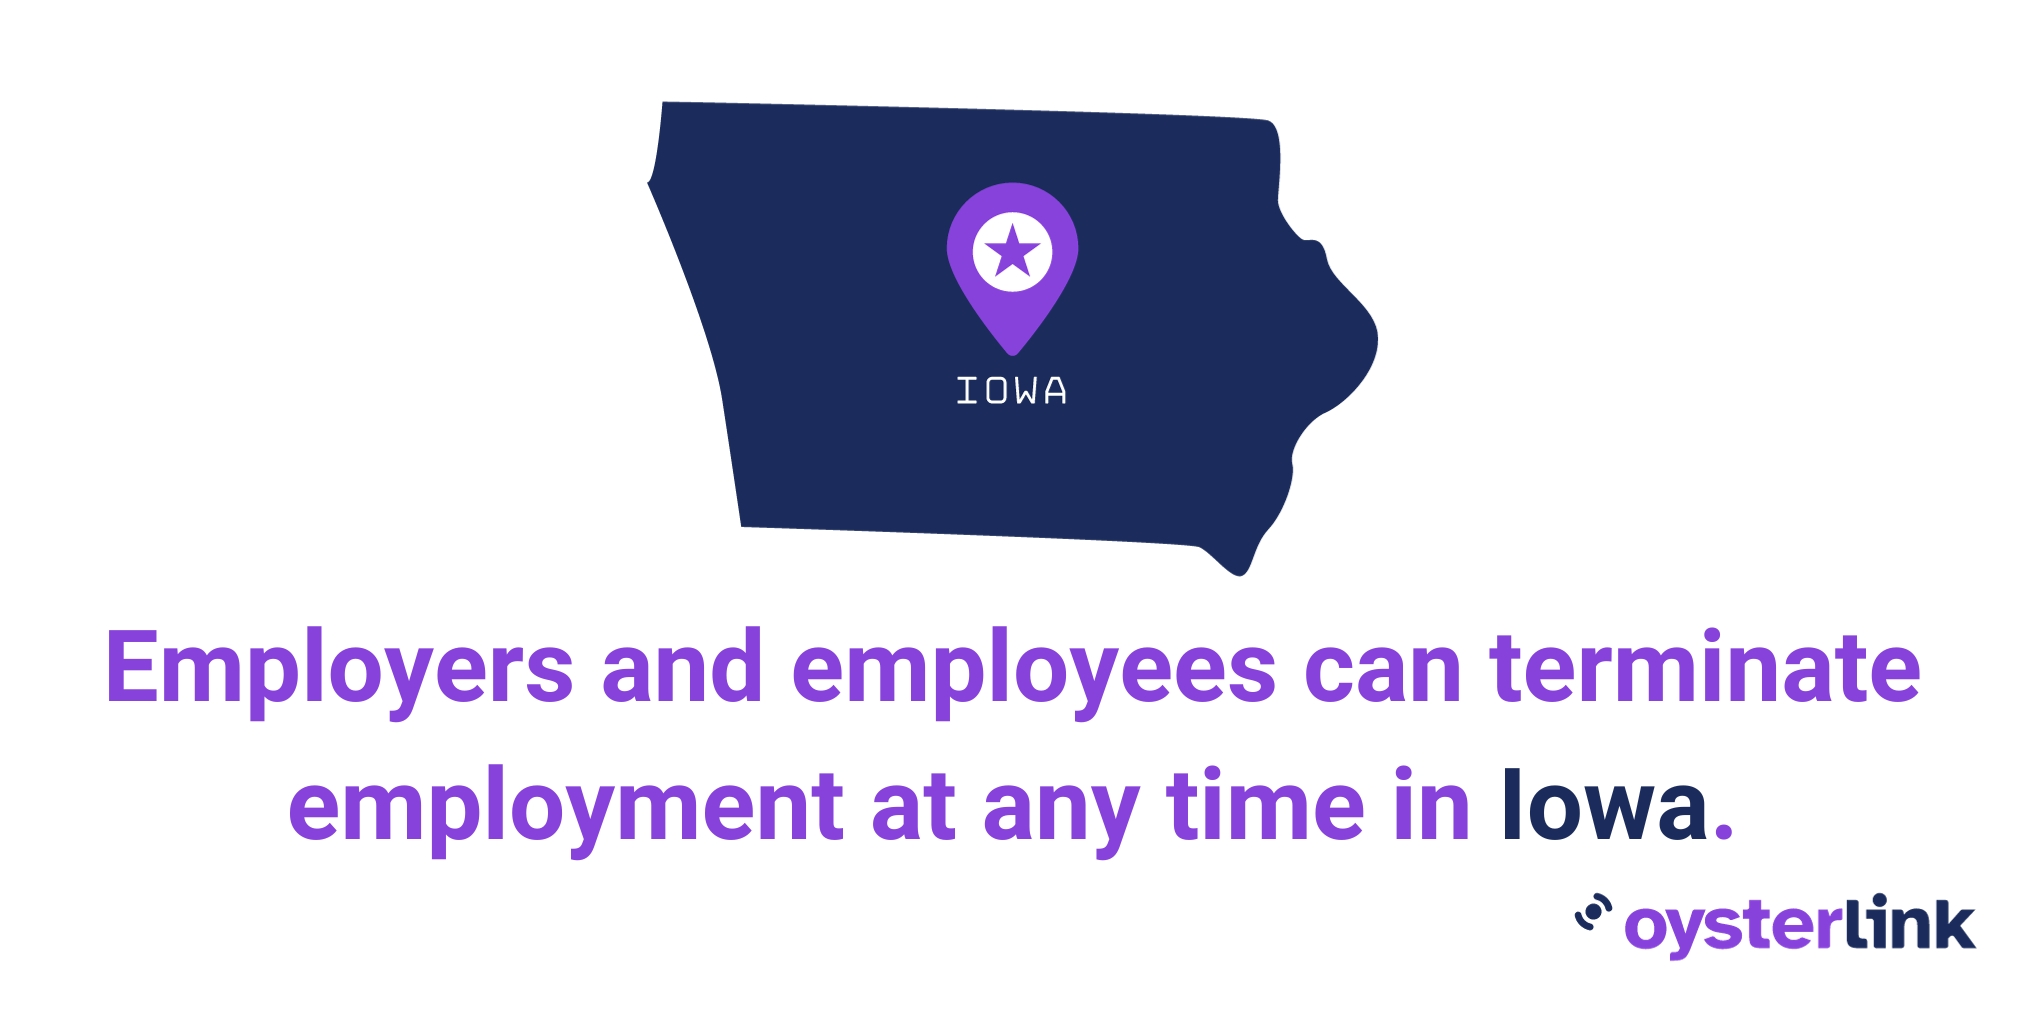 Employers and employees can terminate employment at any time in Iowa